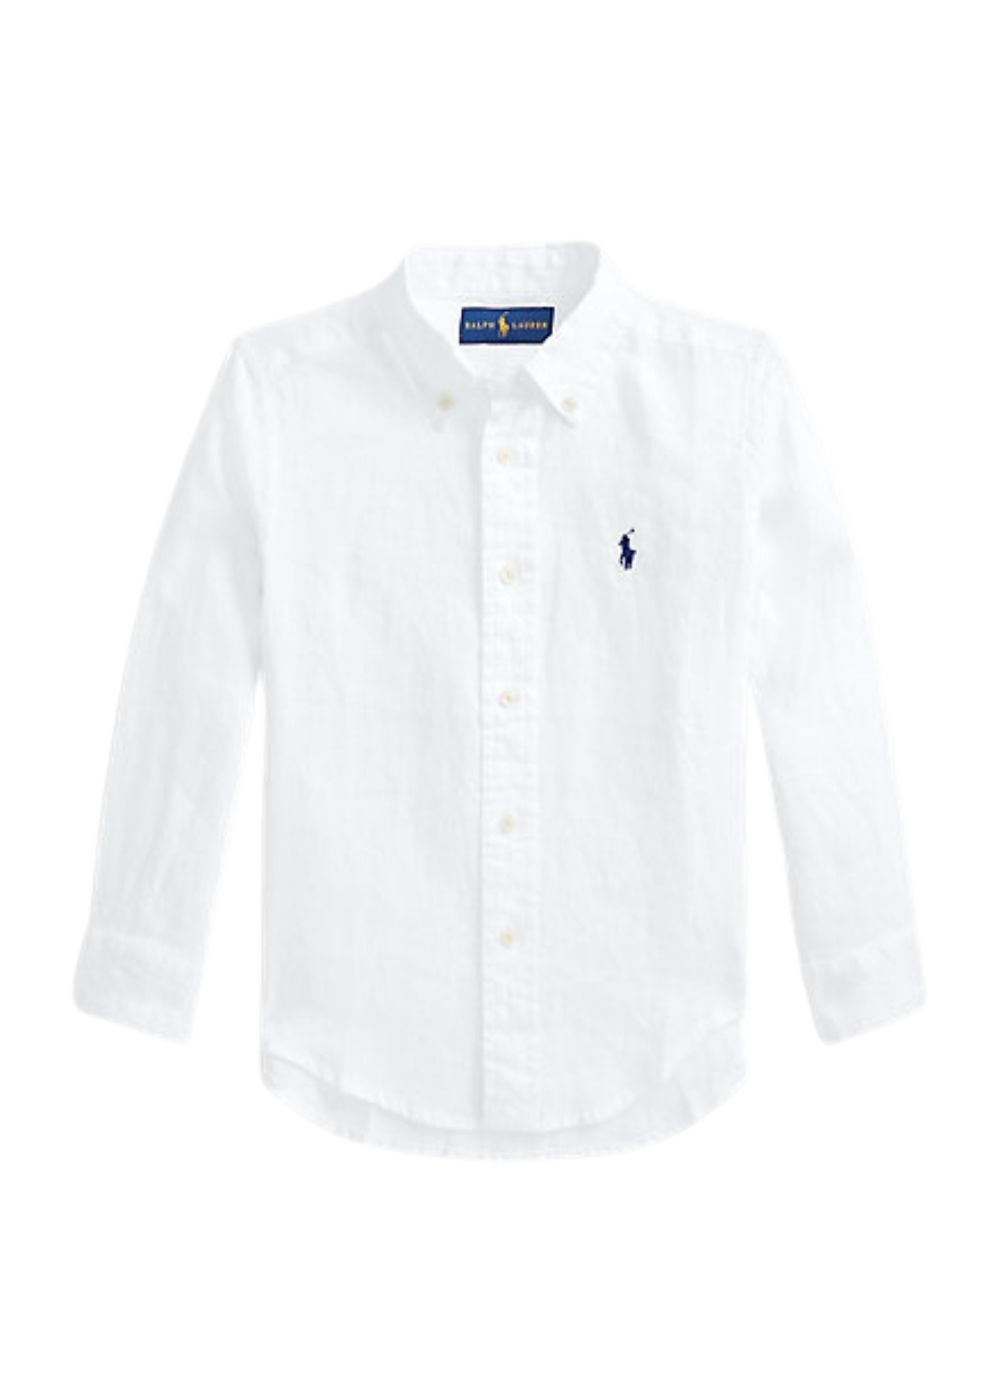 Featured image for “Polo Ralph Lauren Camicia In Lino”